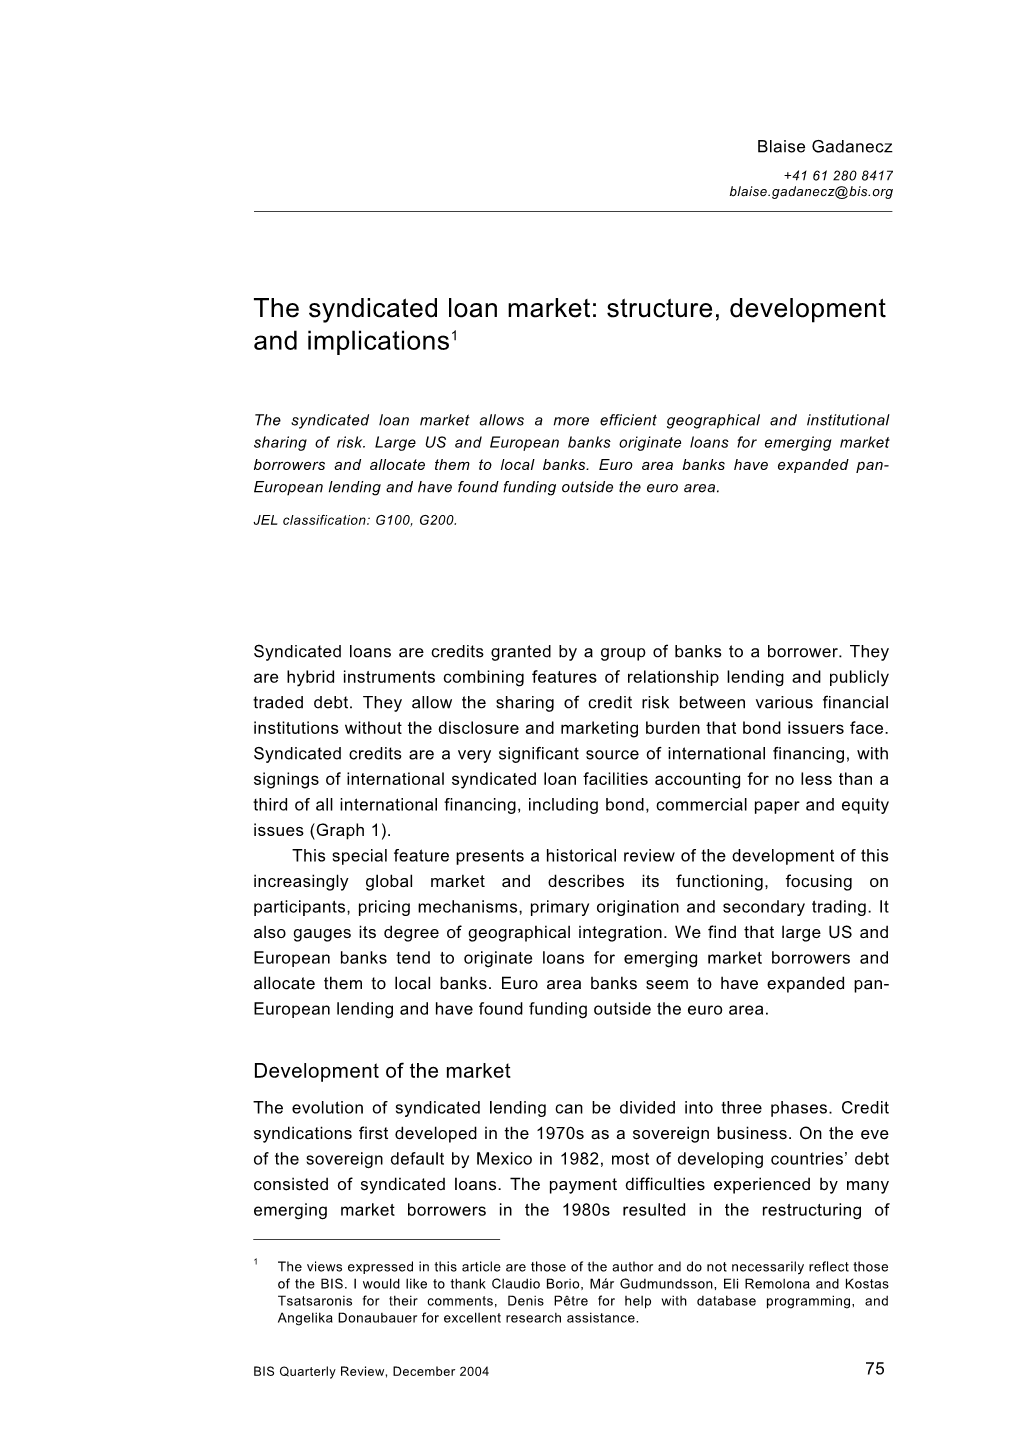 The Syndicated Loan Market: Structure, Development and Implications1